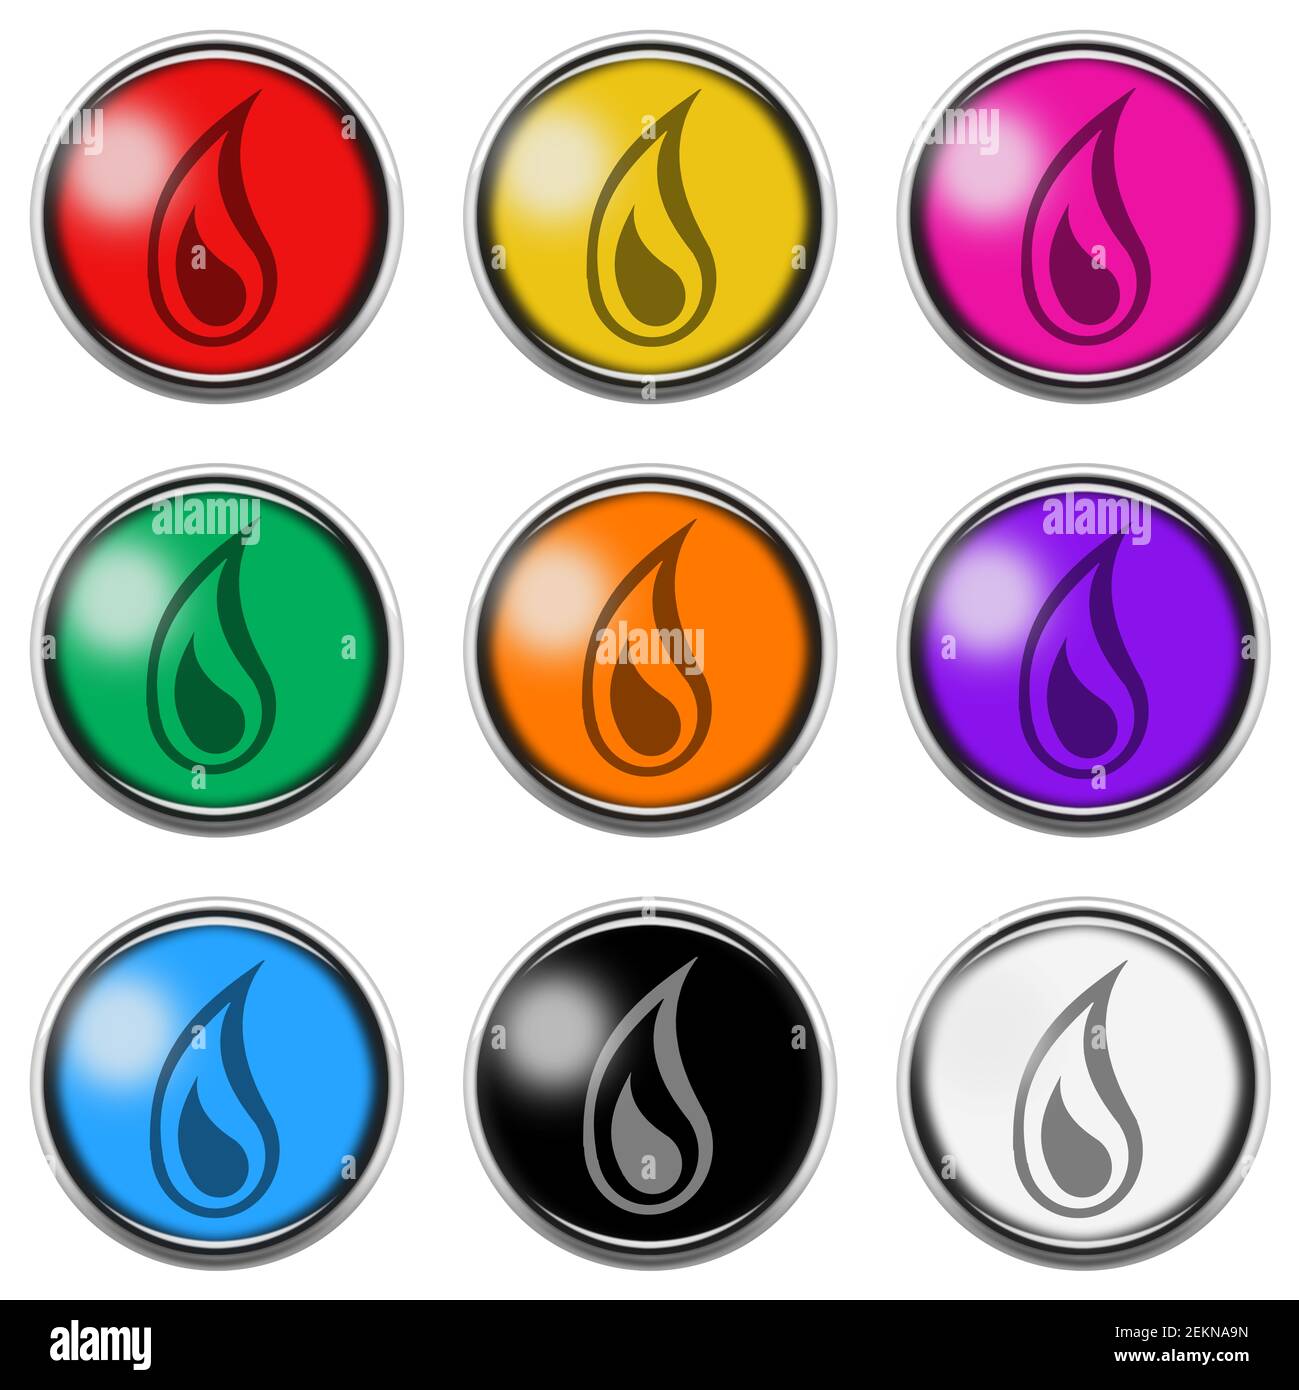 Flame Fire sign button icon set isolated on white with clipping path 3d illustration Stock Photo